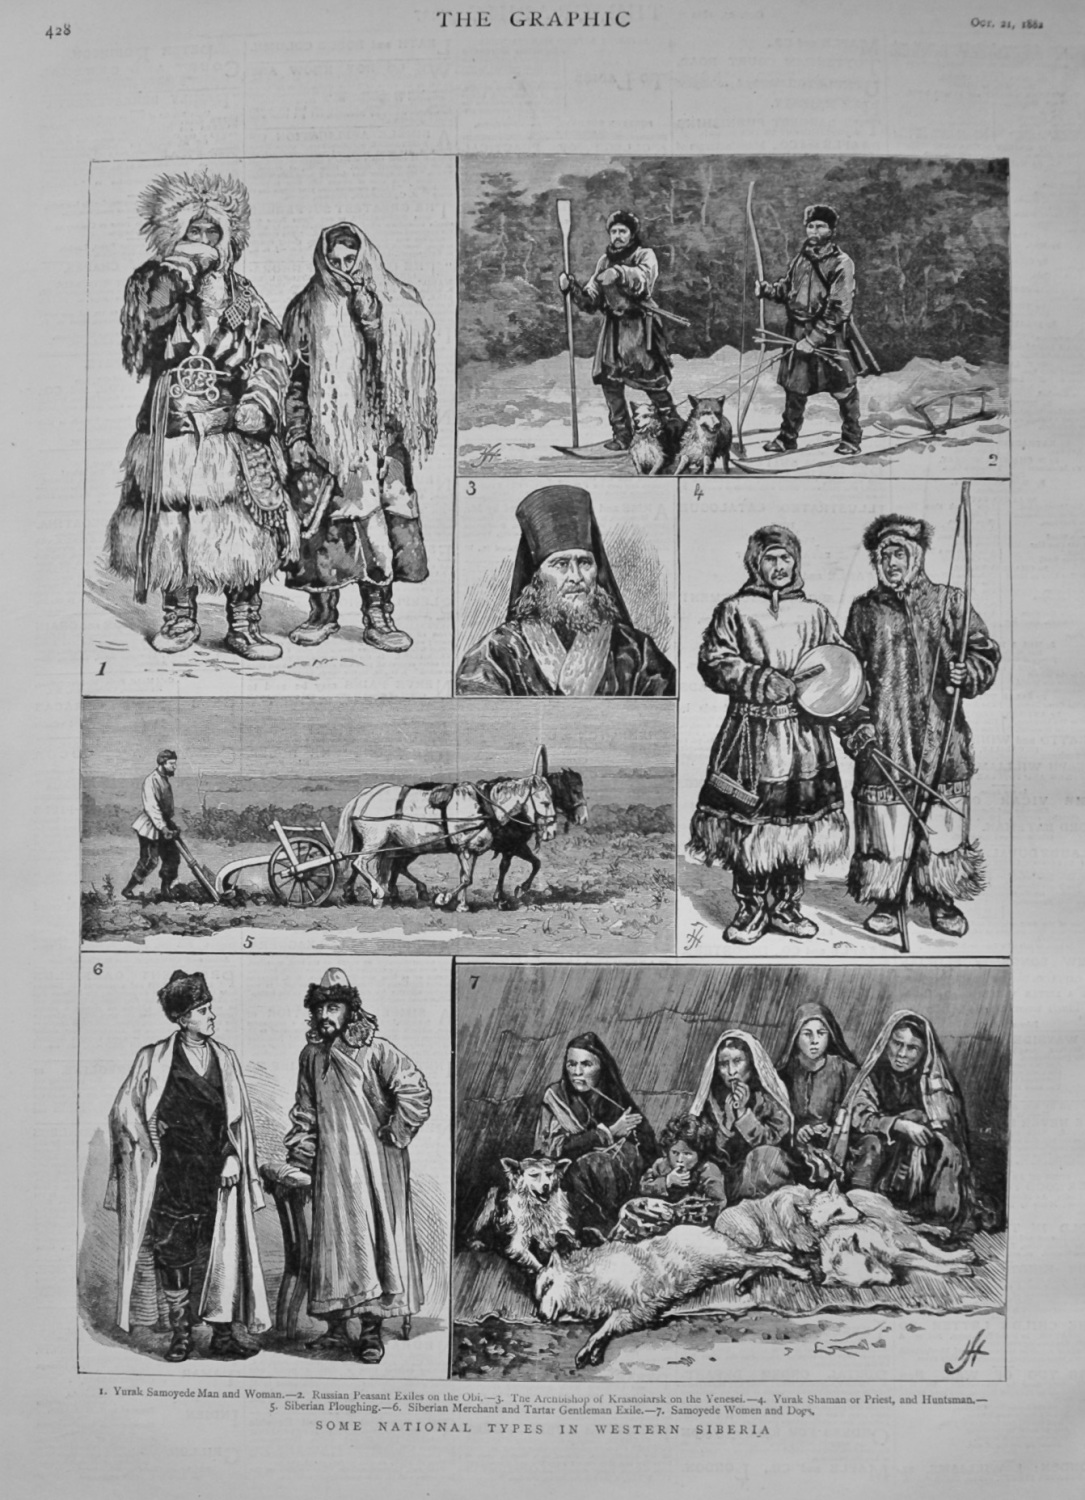 Some National Types in Western Siberia. 1882.